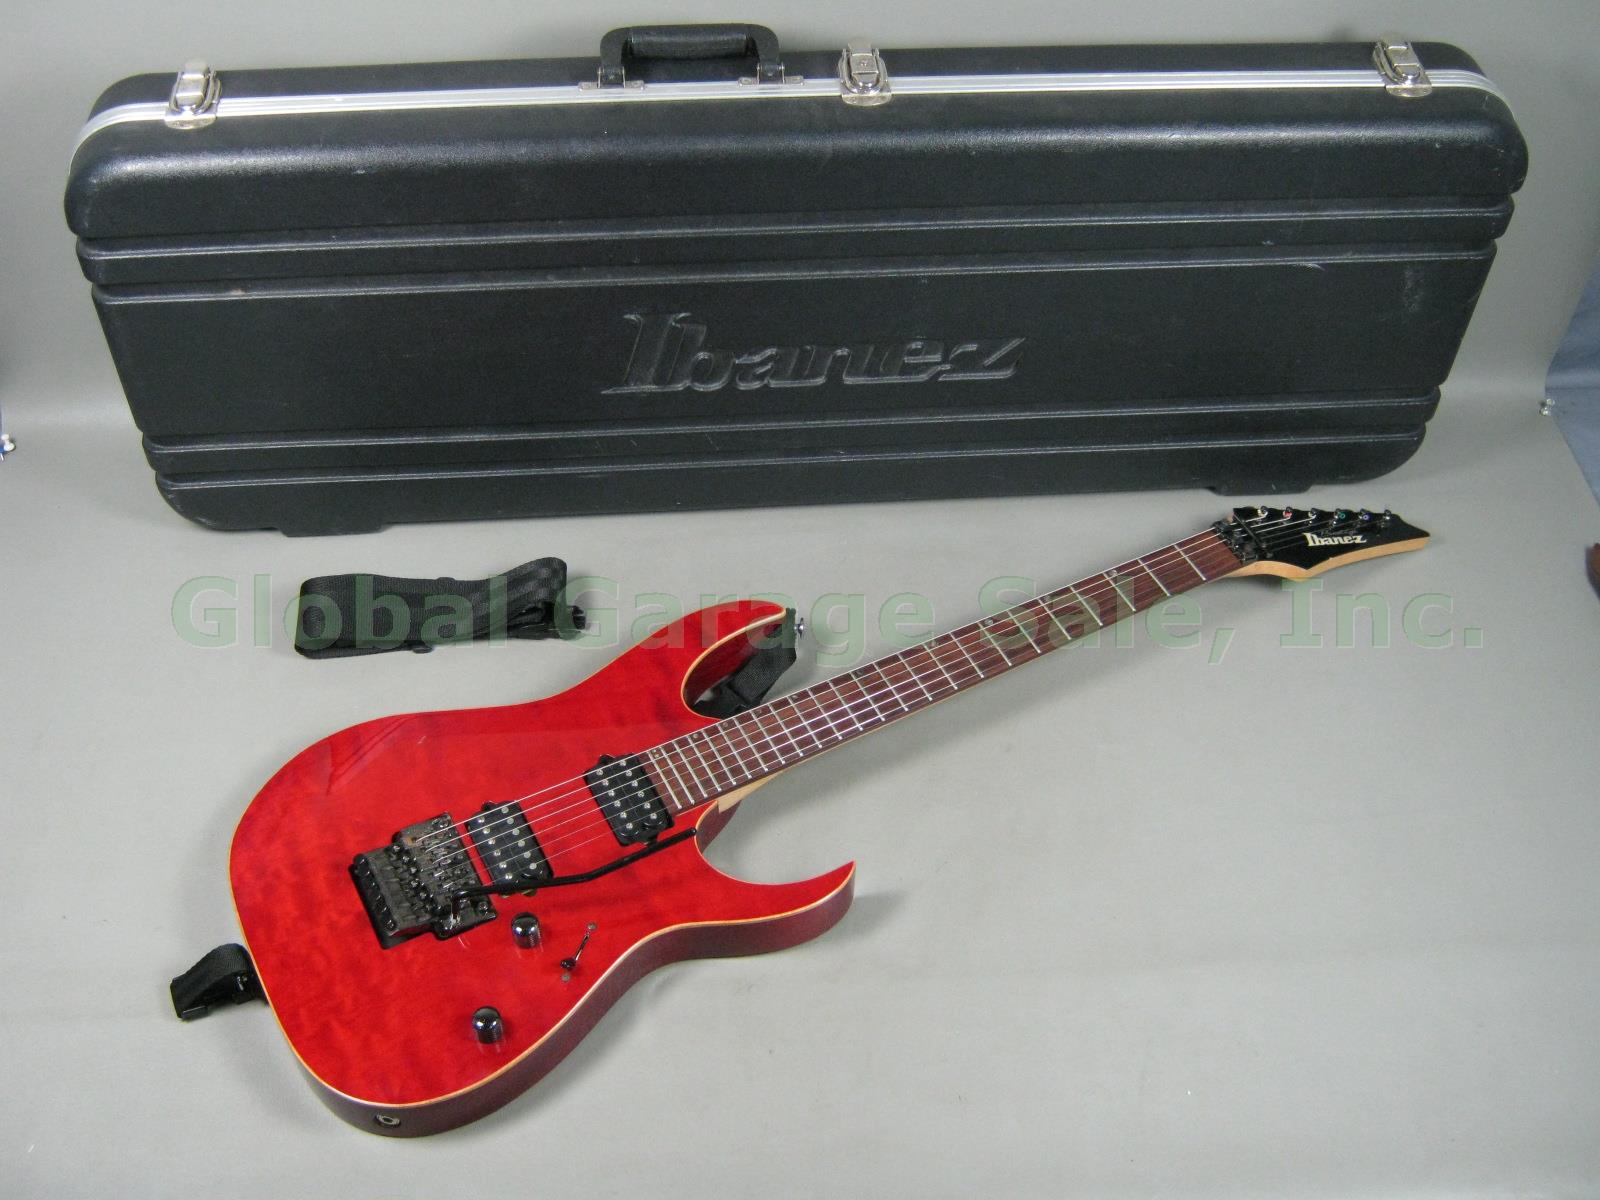 1998 Ibanez Prestige RG3120 Electric Guitar Red Quilted Maple Floyd Rose Tremolo